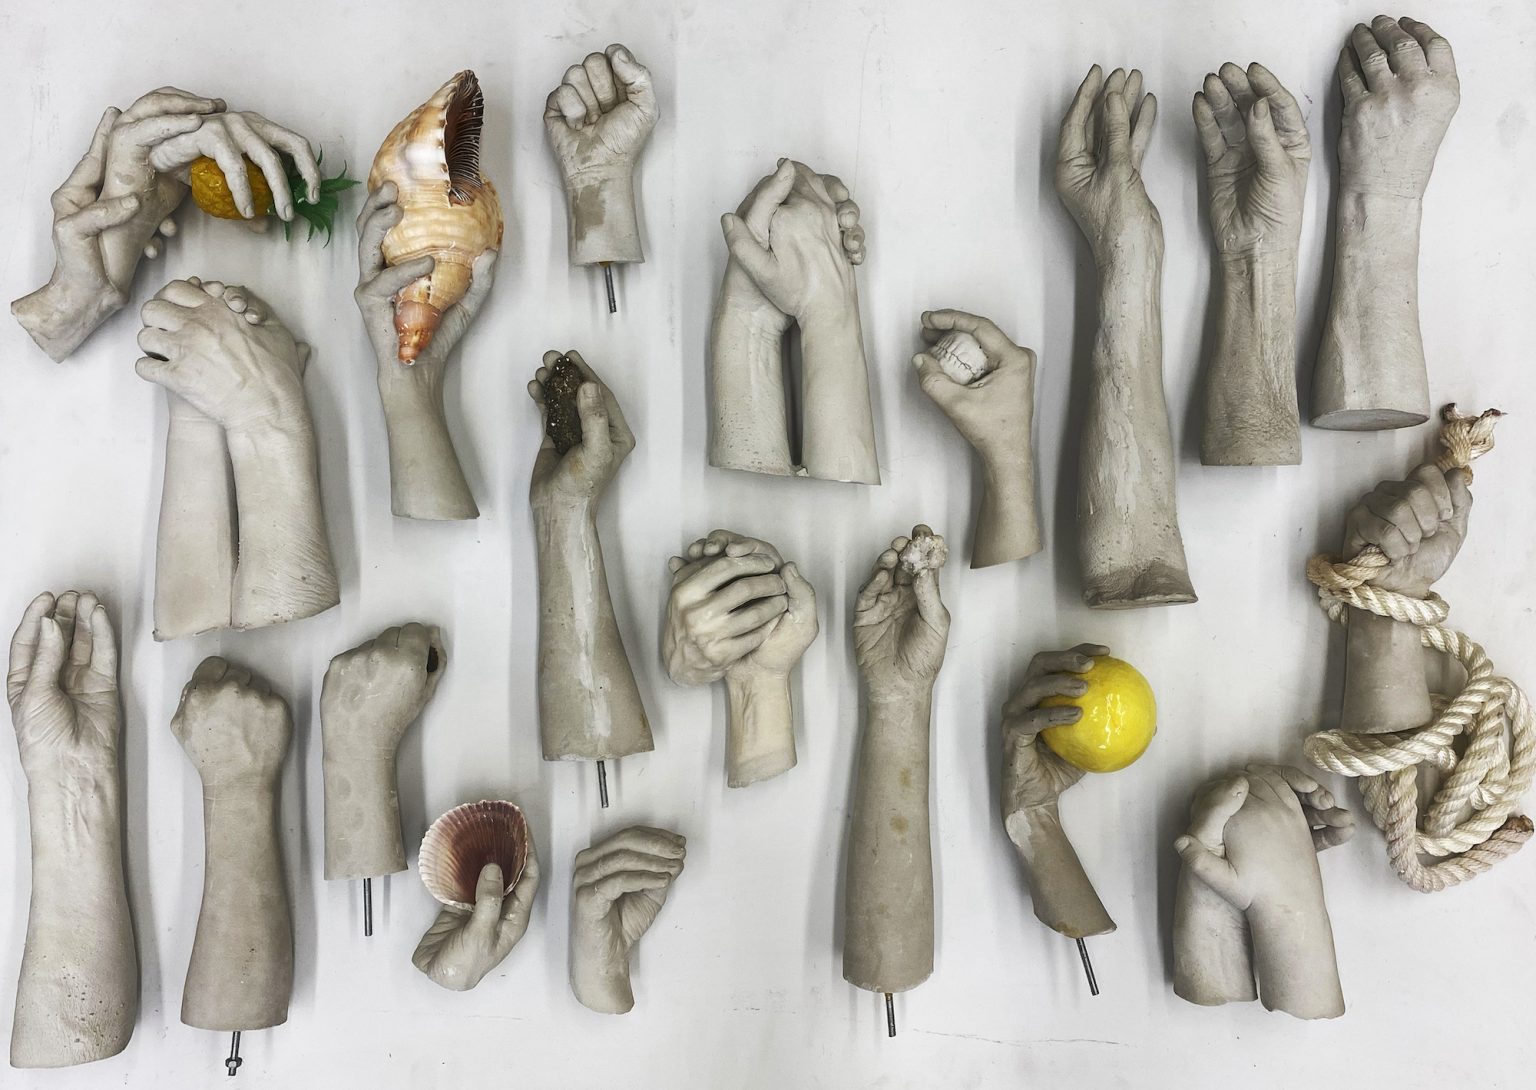 Various hands made of plaster lie on a white surface. They have a lifelike appearance indicating they are modeled after people’s hands. Each hand is holding an item: A lemon, a shell, a pineapple, and other objects. The lifelike appearance and gray tone makes them look like real, chopped off hands.